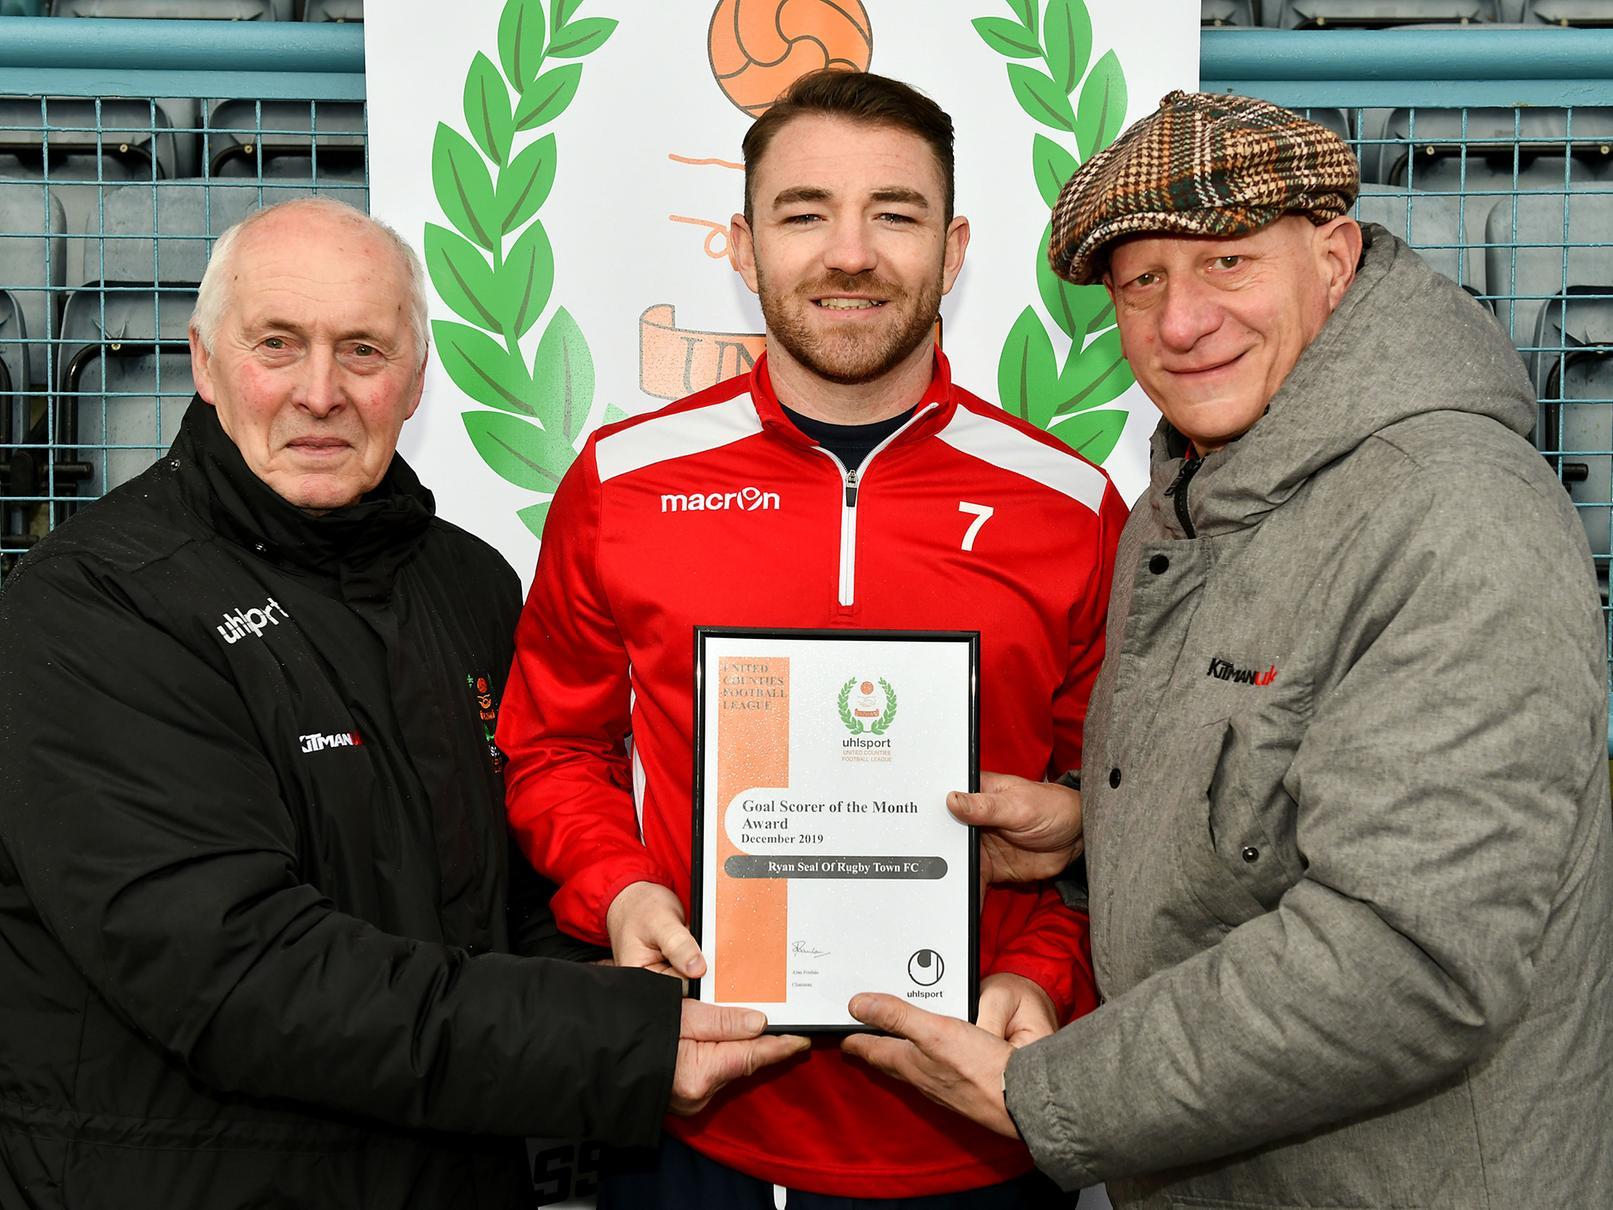 Ryan Seal was the league's Goalscorer of the Month for December. His tally now stands at 15 goals for the season